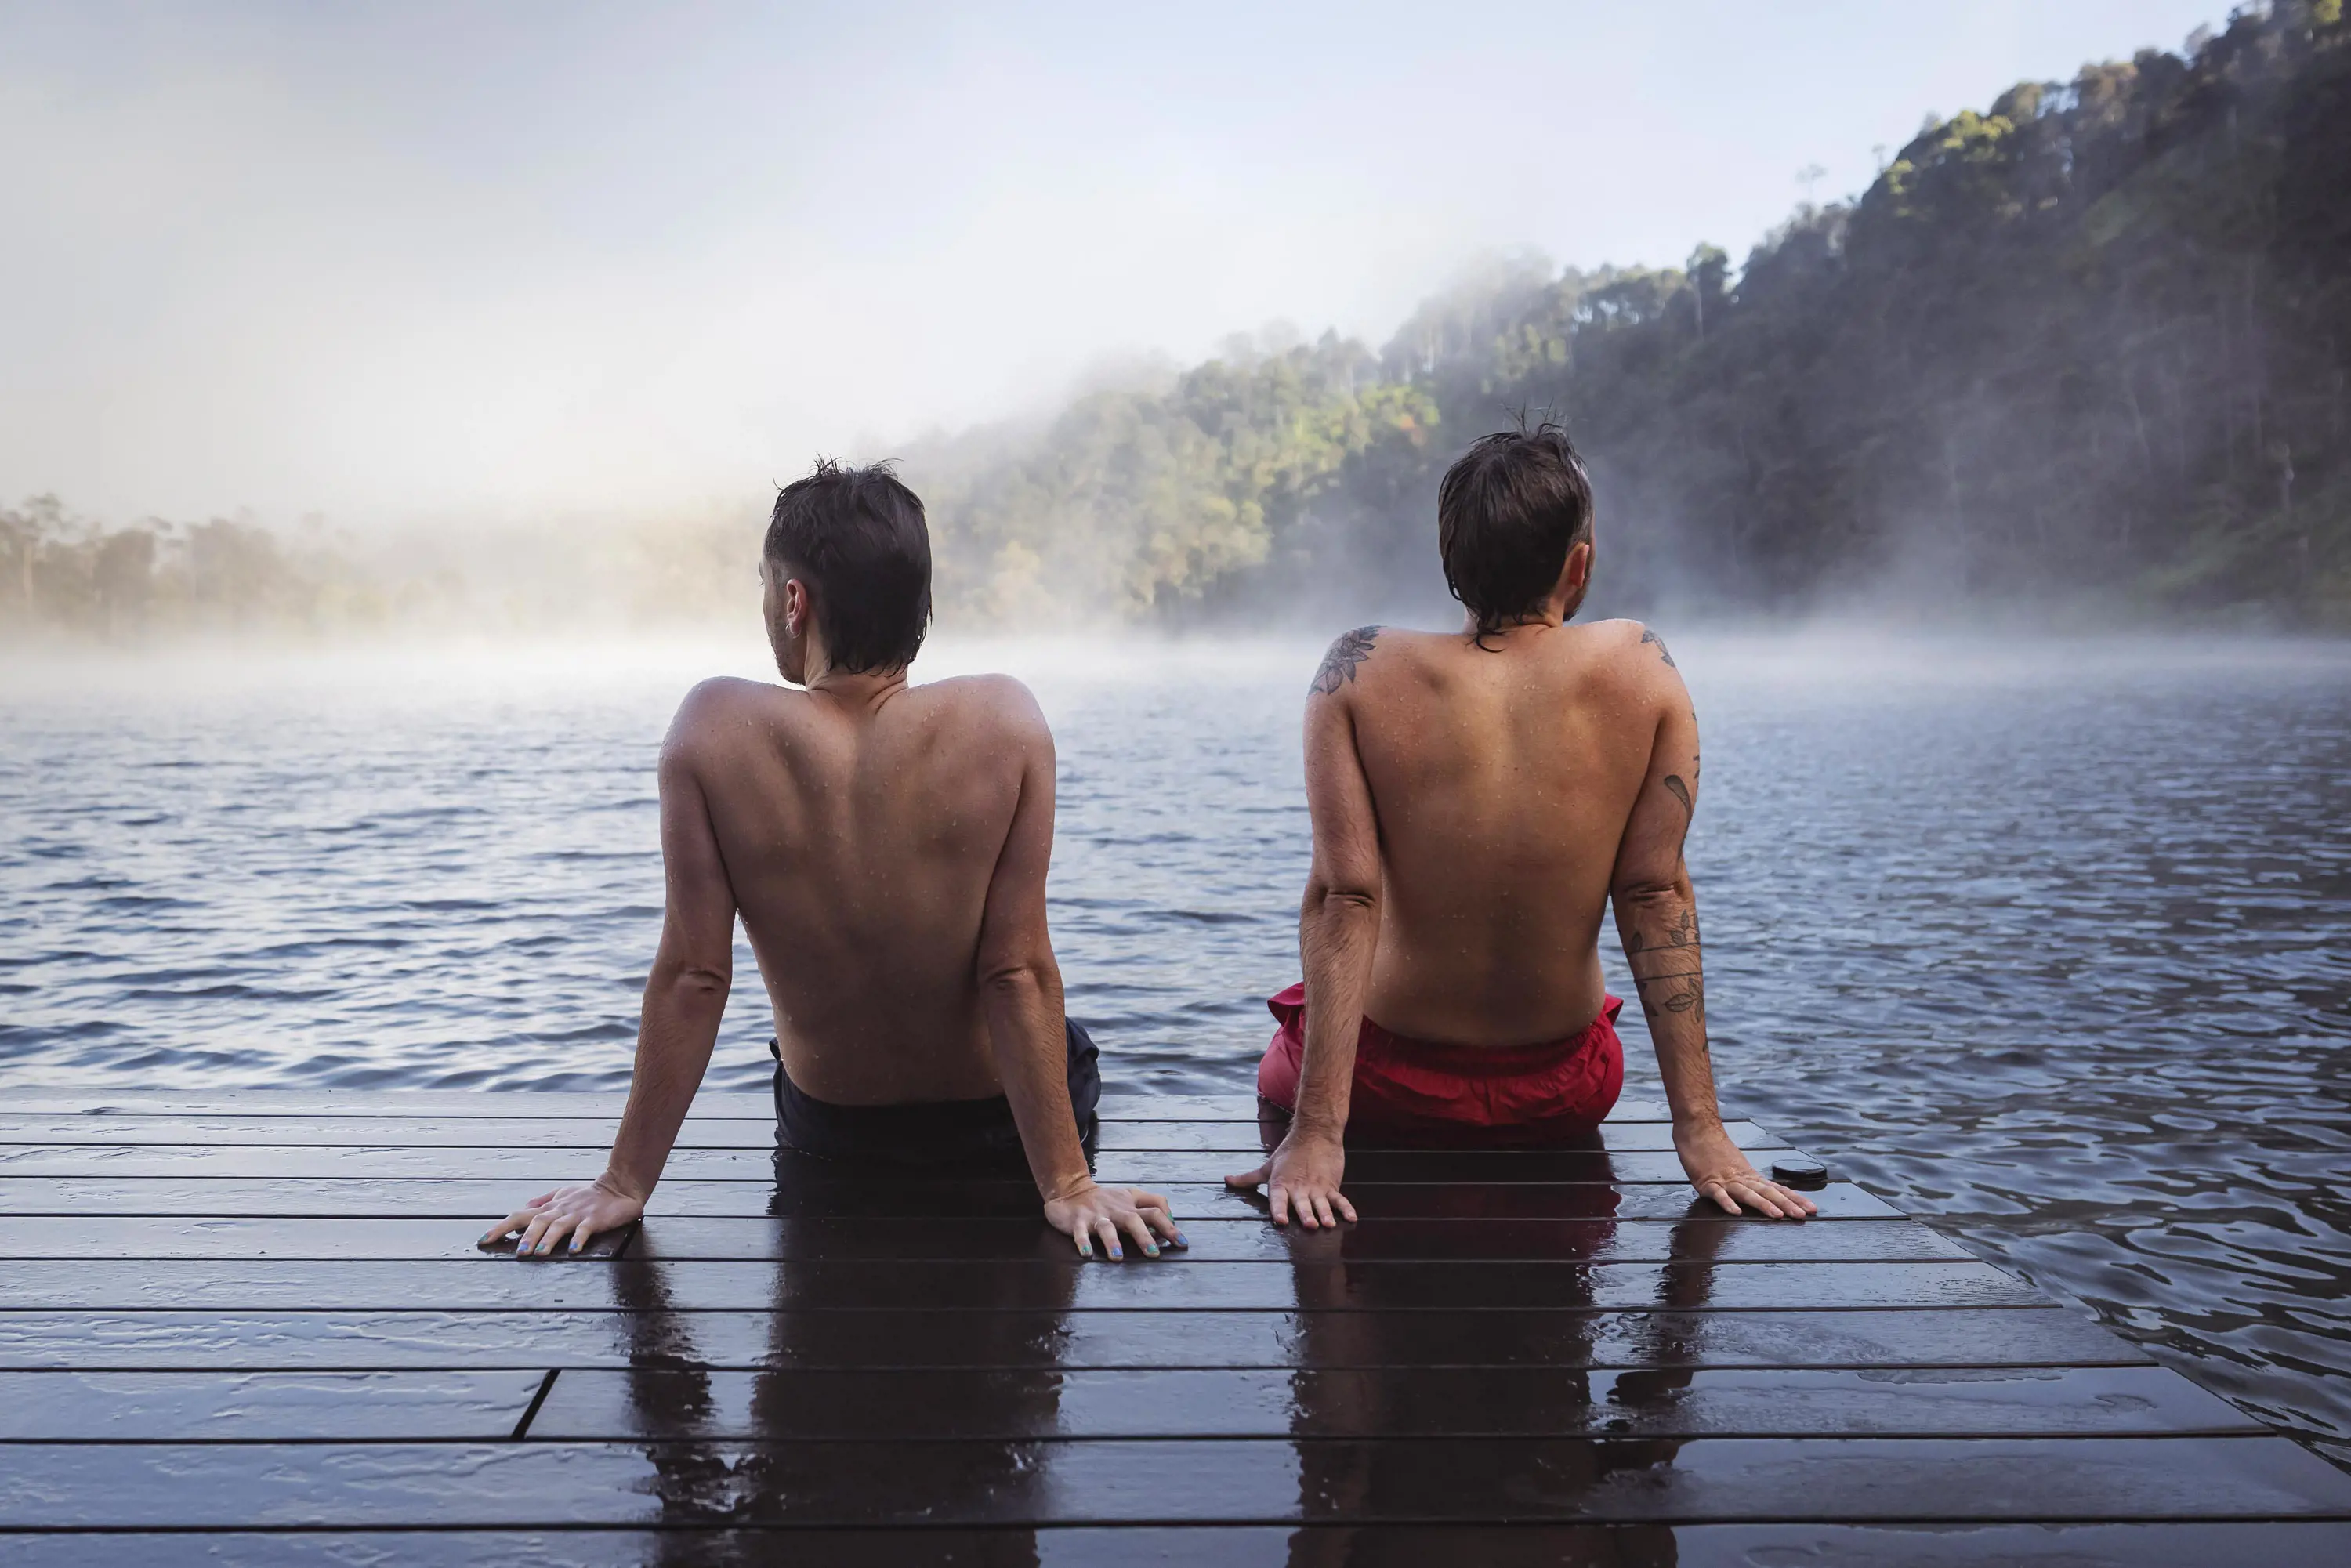 Two young men sit on the end of wooden decking looking out over a misty lake. 